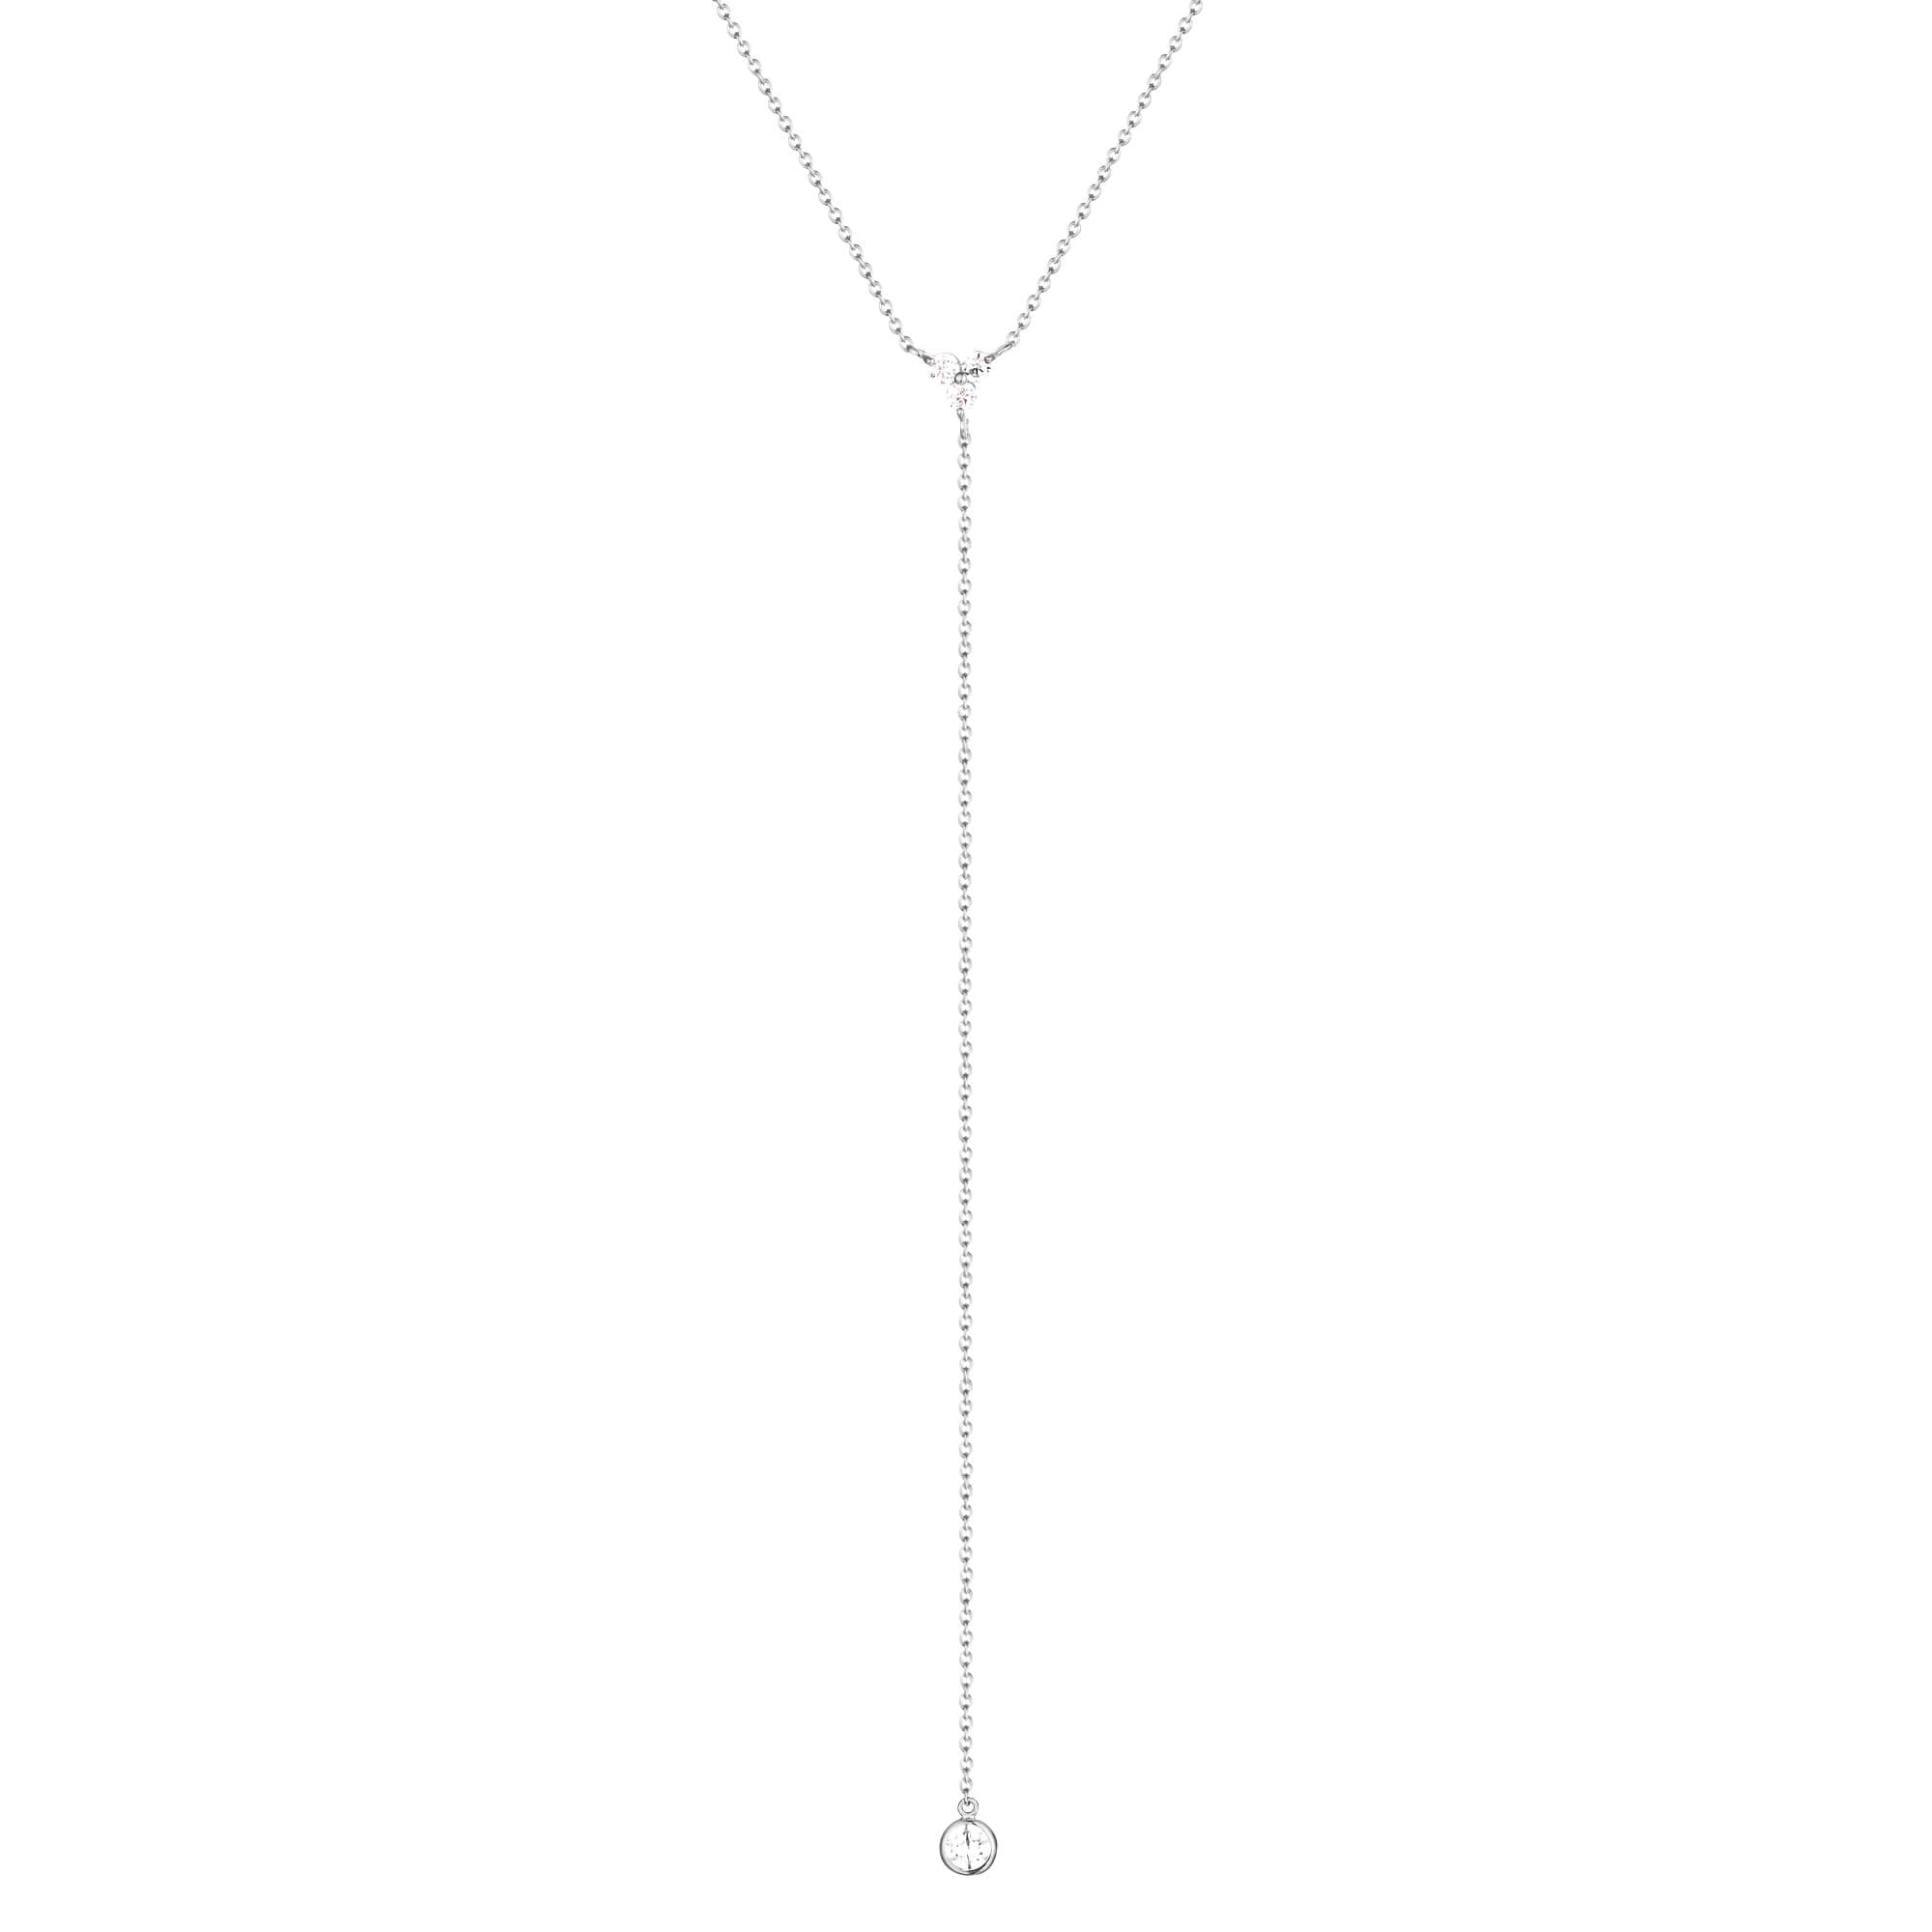 silver lariat Necklace - seol-gold